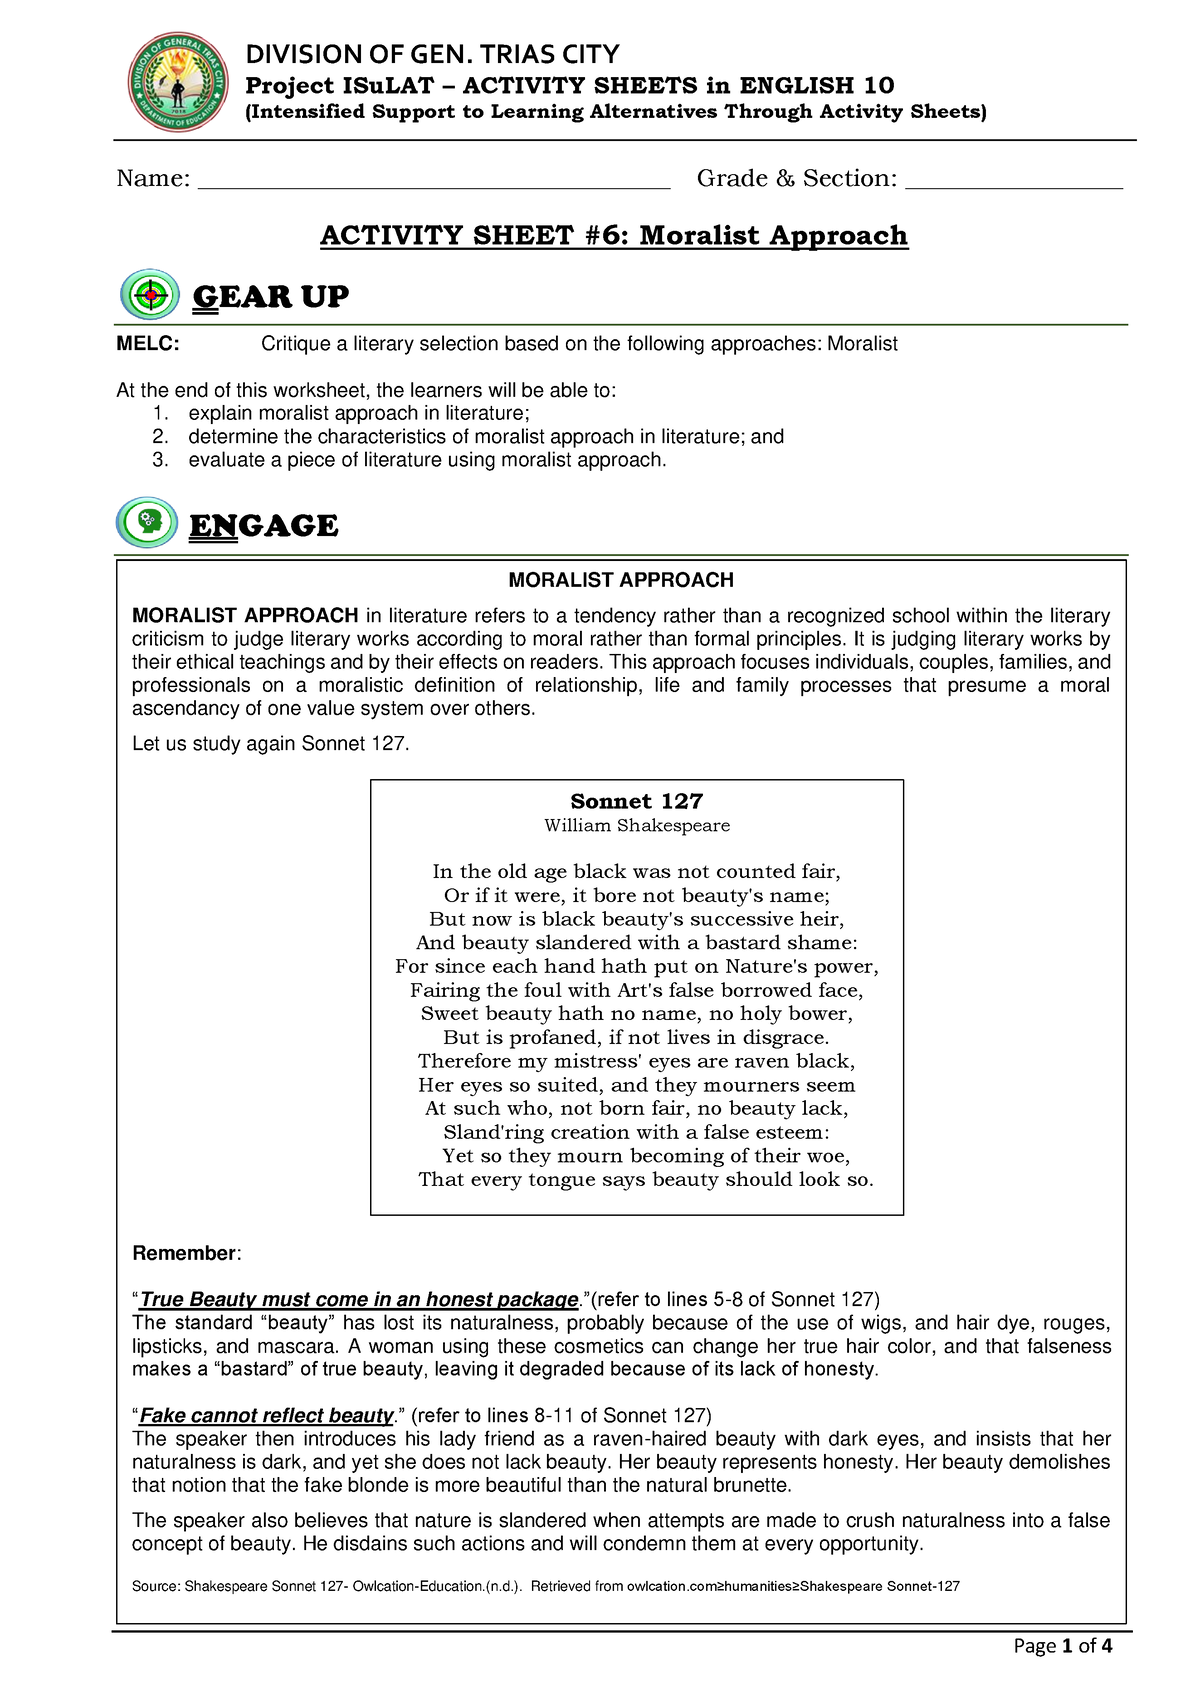 English 10 As6 Moralist Final Project Isulat Activity Sheets In English 10 5358